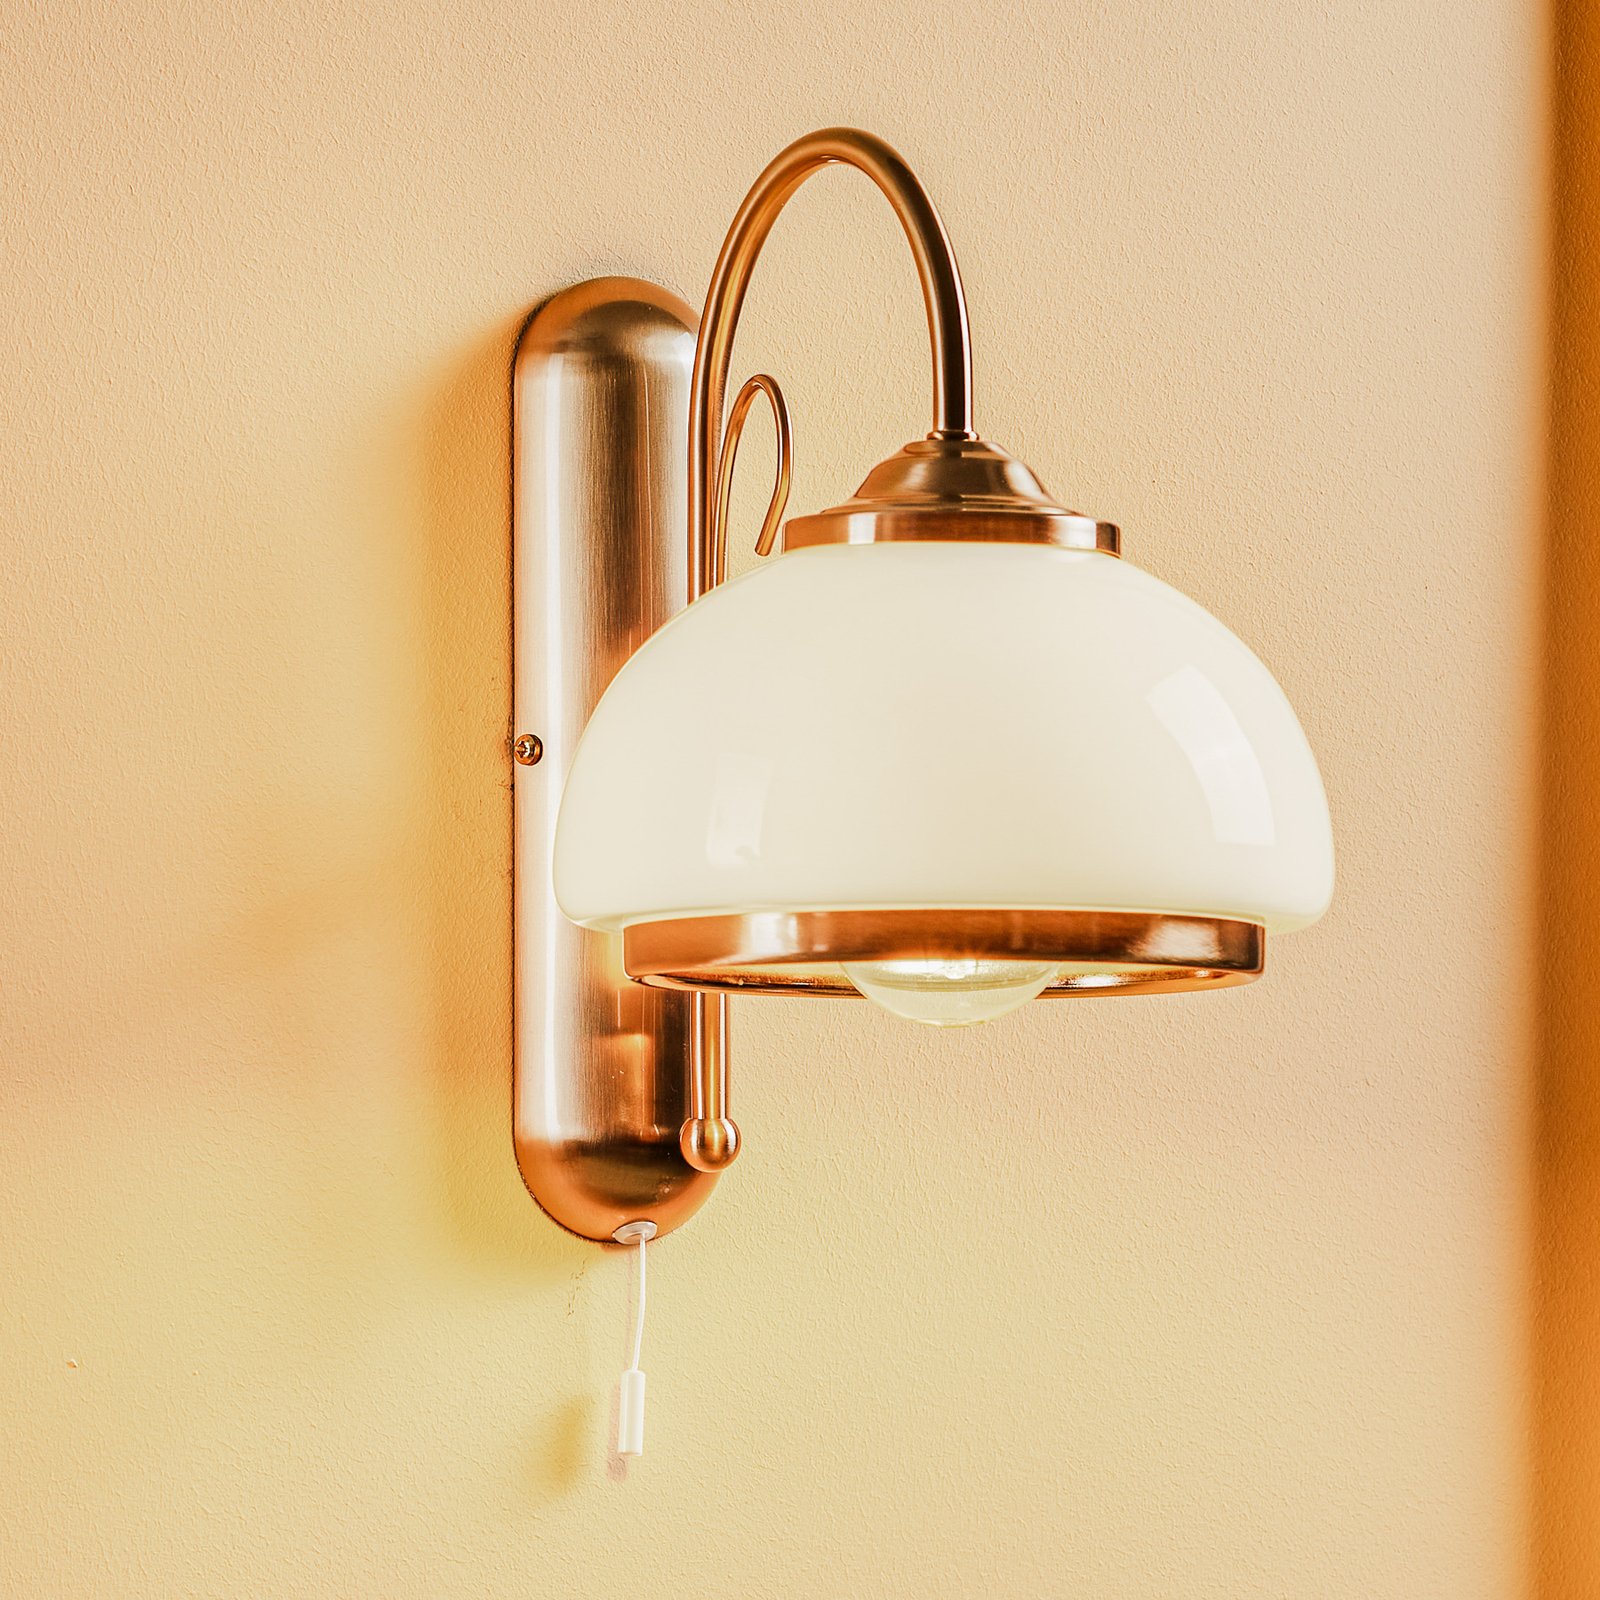 Parsau wall light with a glass lampshade